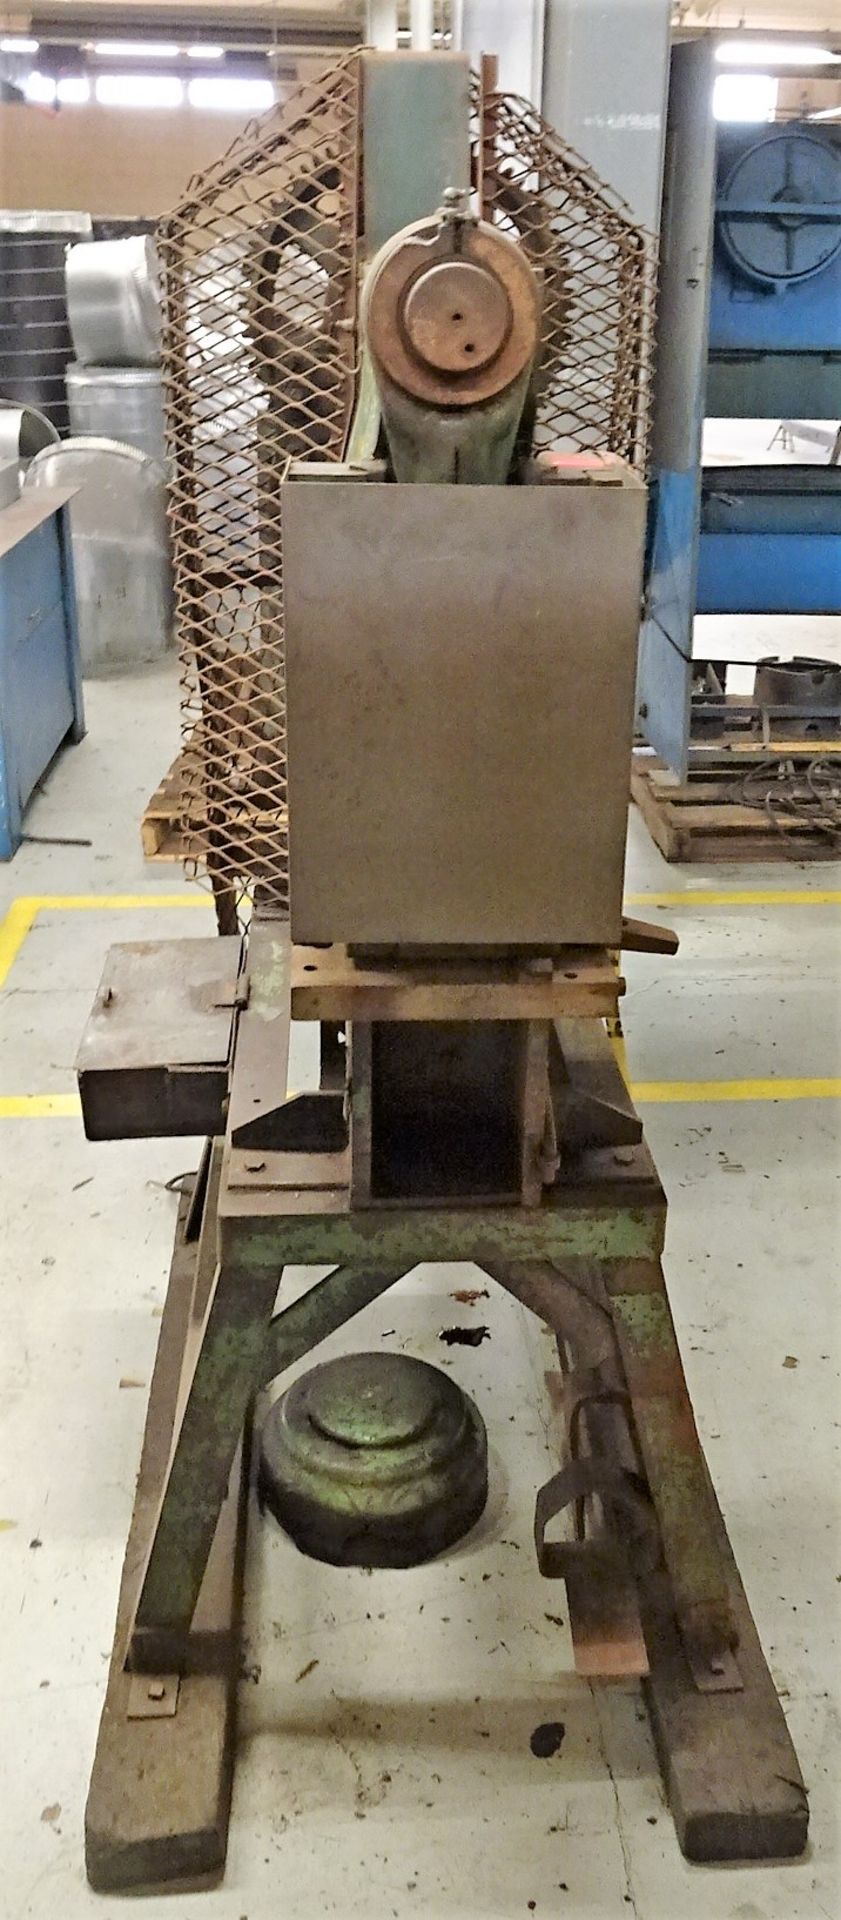 WHITNEY-JENSEN APPROXIMATELY 18-TON MECHANICAL PRESS, WITH INTERCHANGEABLE DIES, PRESENT DIE IS